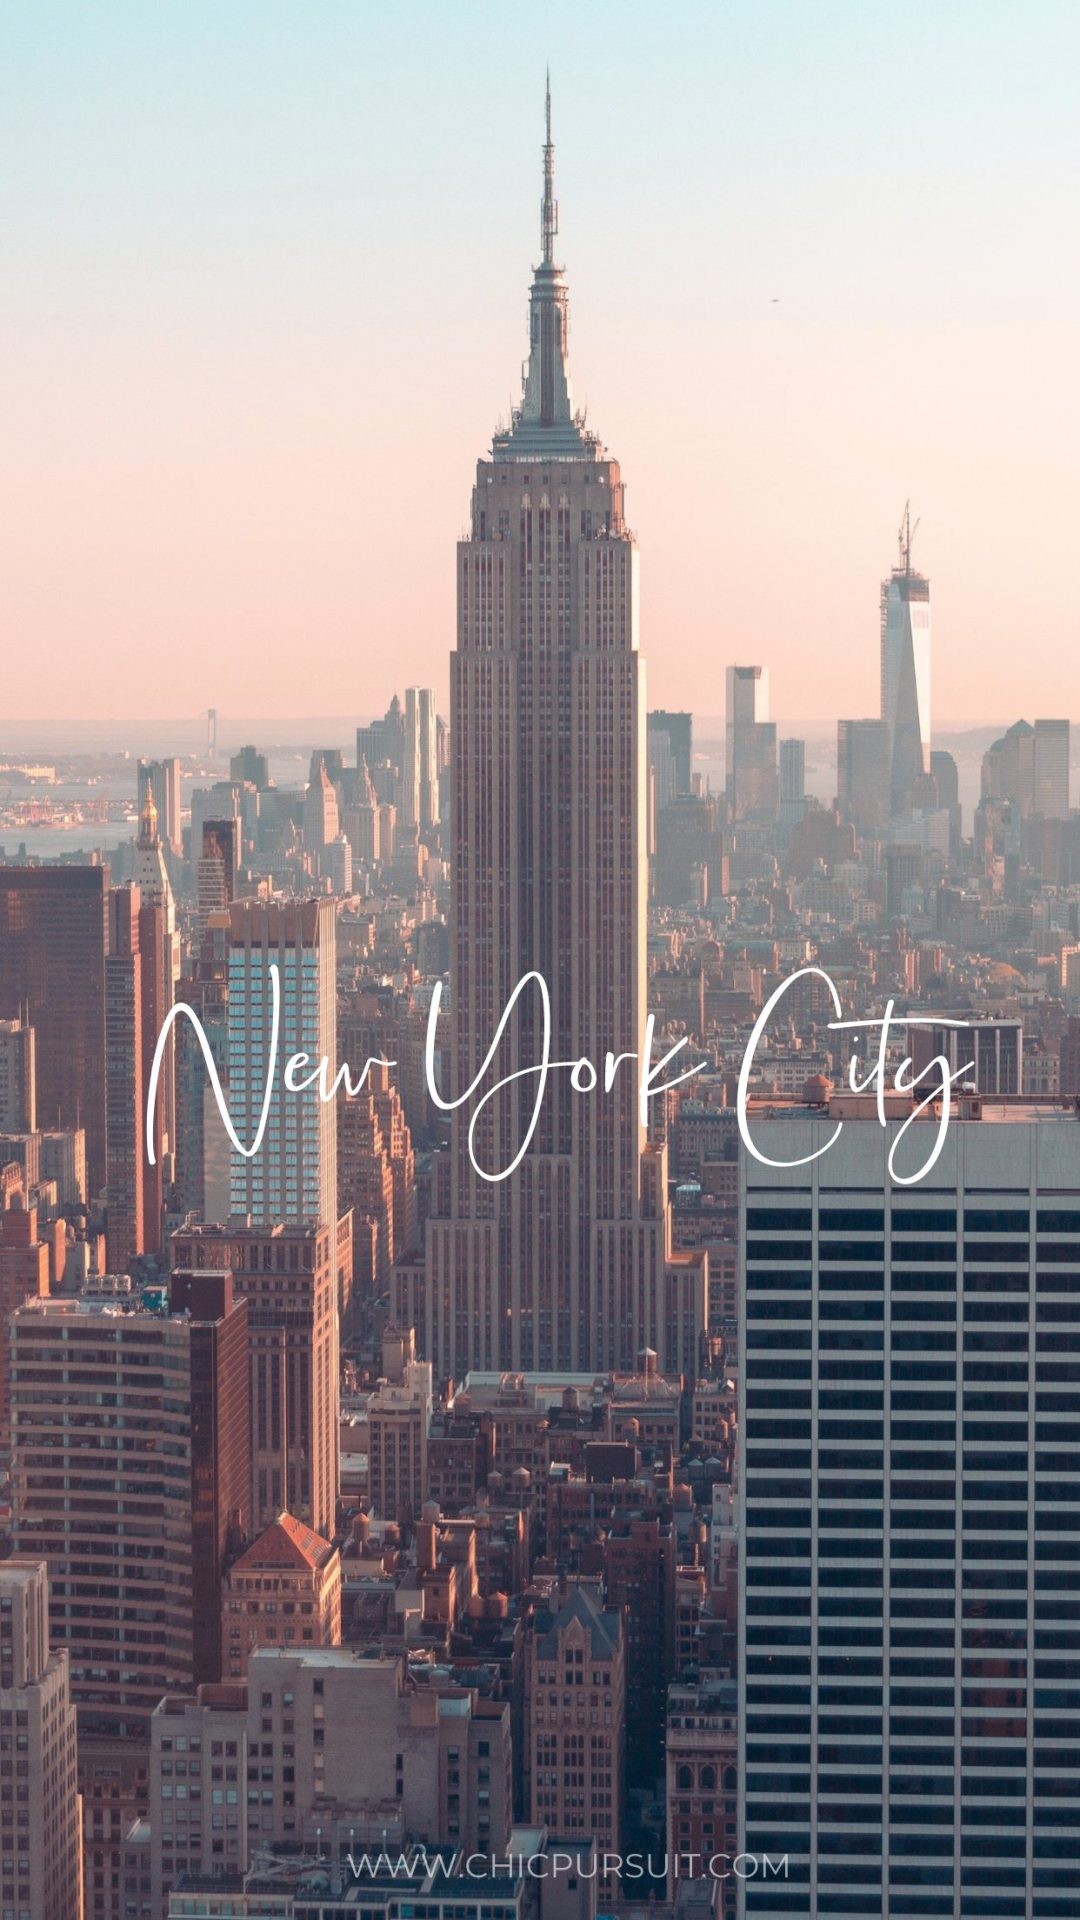 74 New York Wallpaper for iPhone